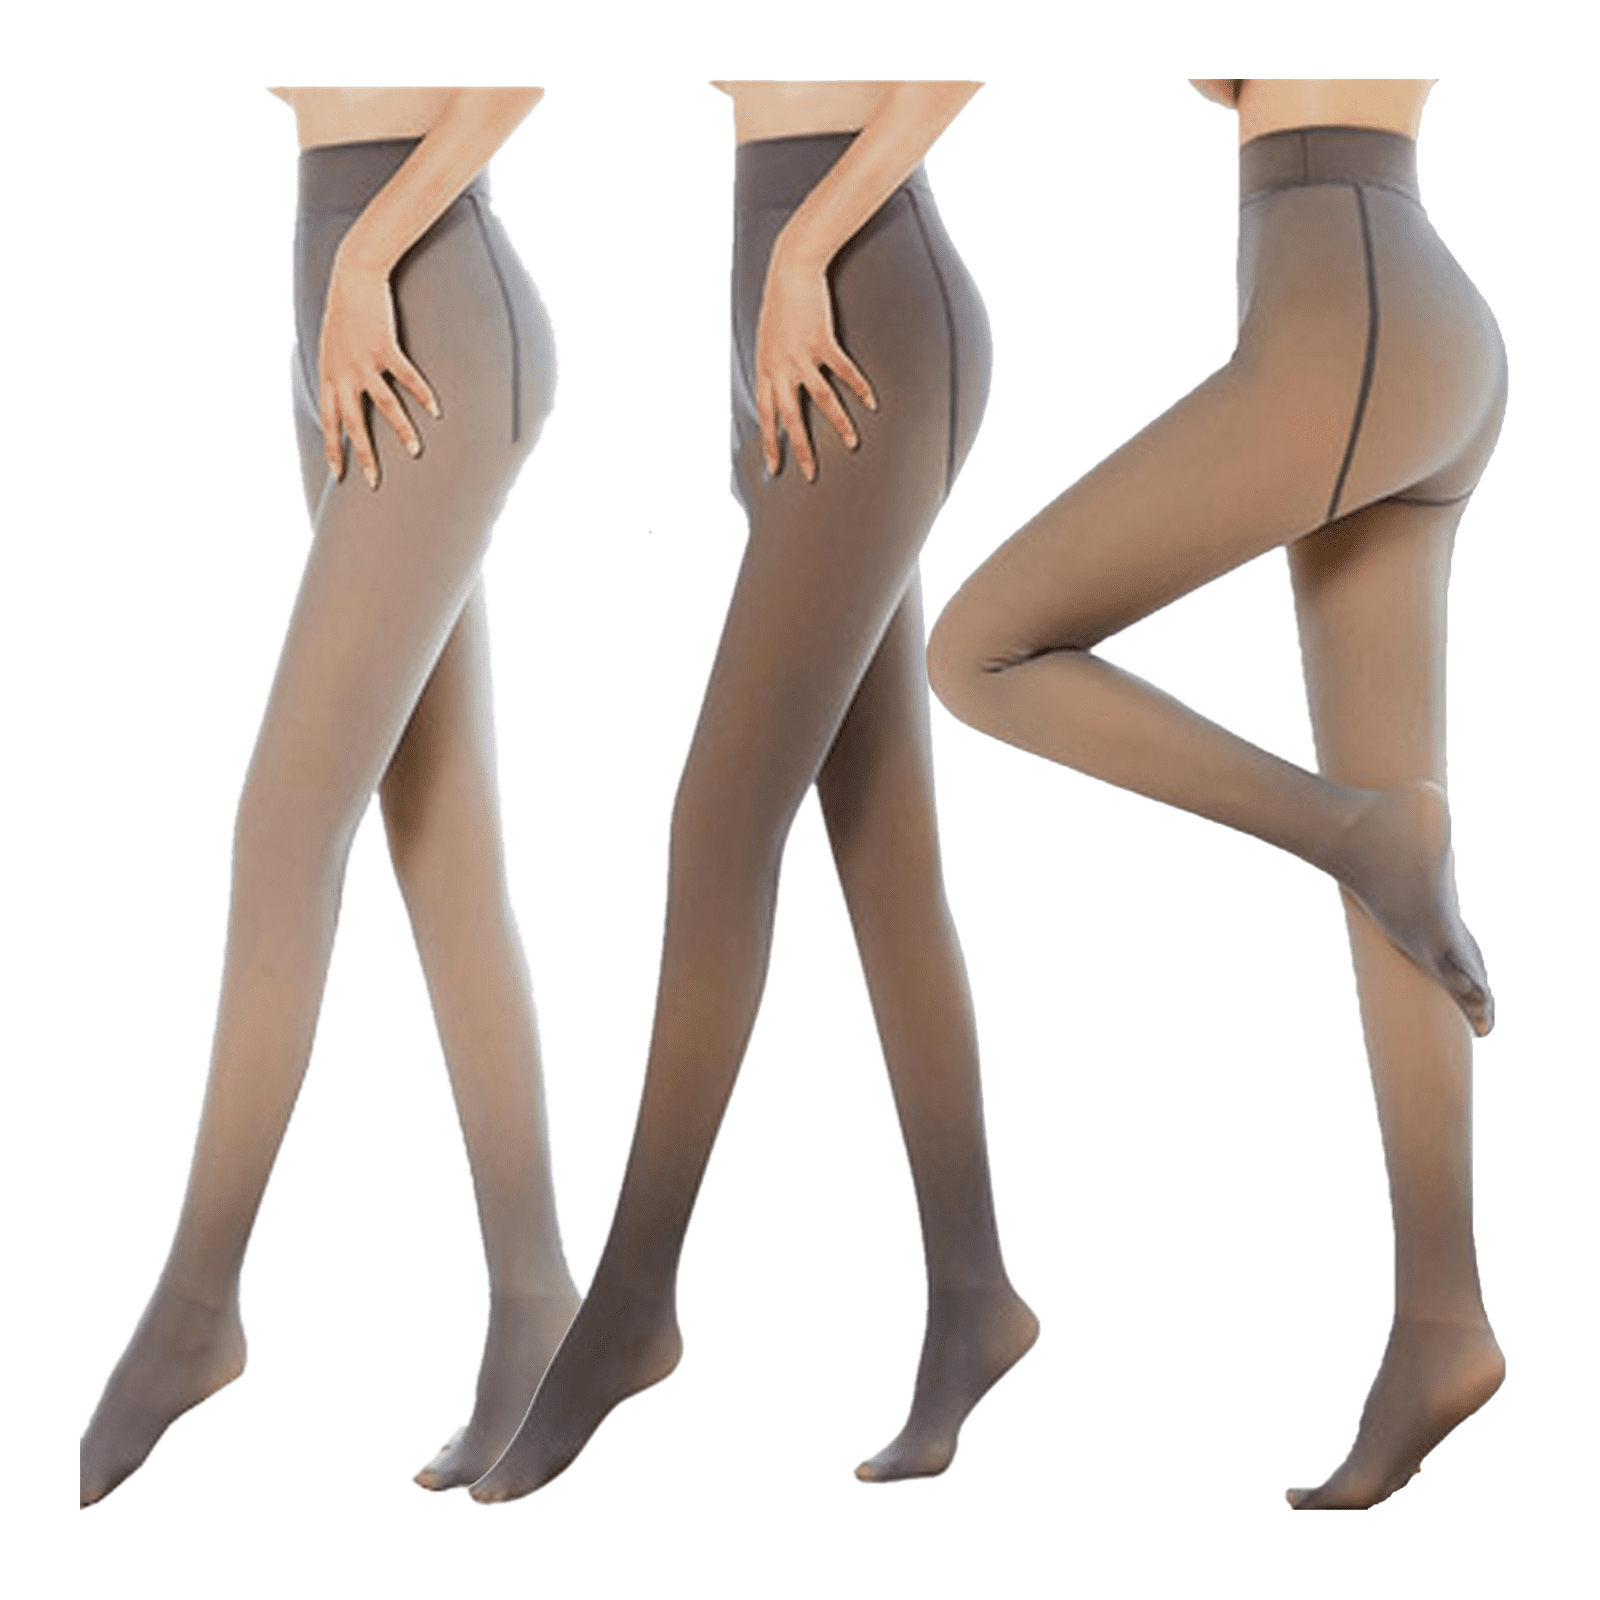 DYXIA Plus Size Women Fleece Lined Tights, Fake Translucent Thermal  Leggings, Winter Warm Pantyhose Footless Tights (Color : Skin Color, Size 